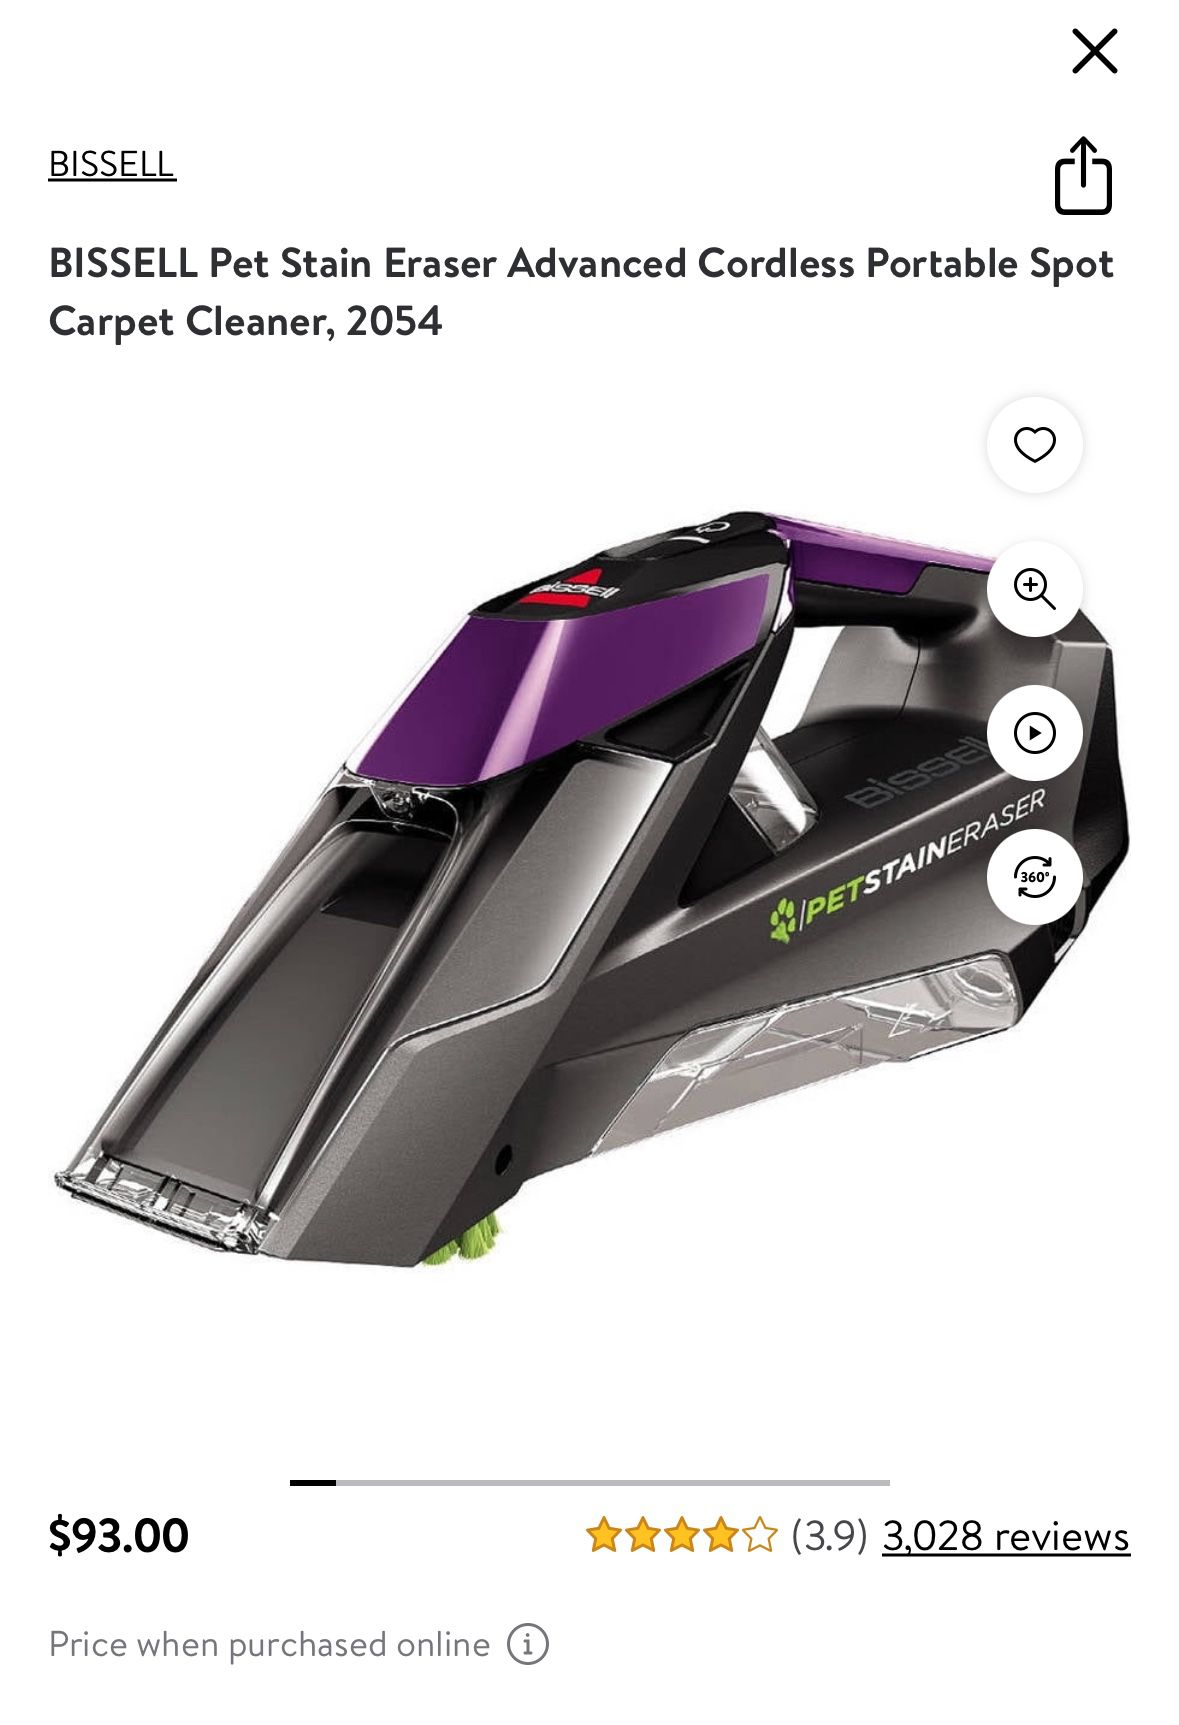 BISSELL Cordless Spot Carpet Cleaner